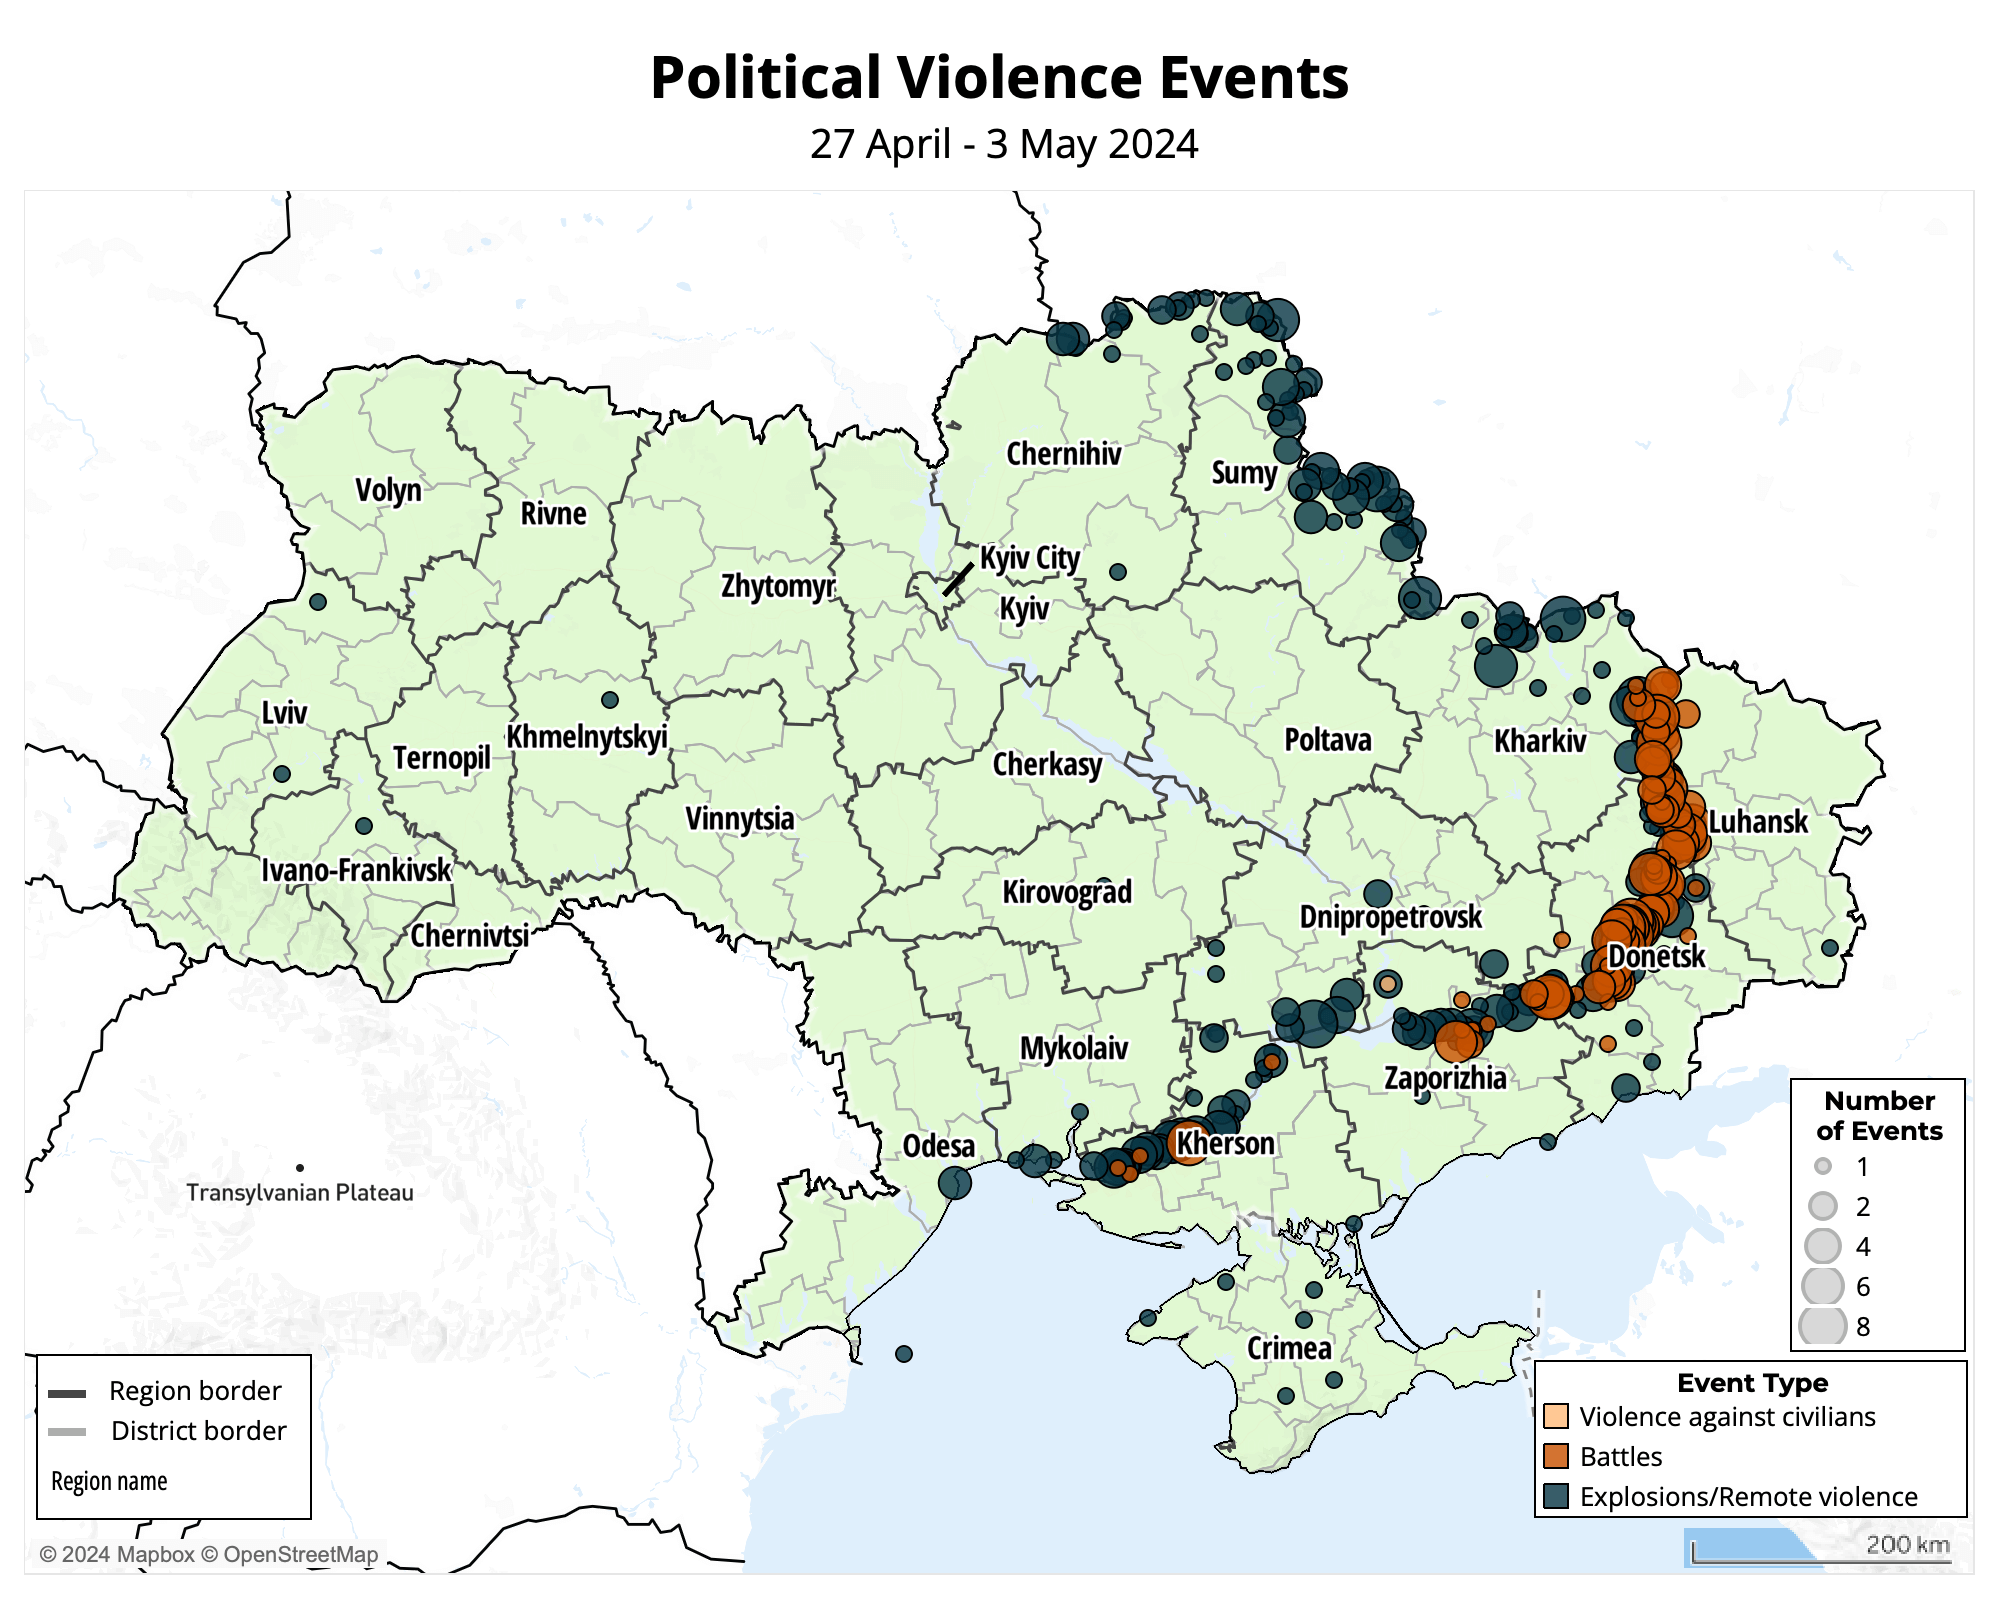 Map showing political violence events in Ukraine, 27 april - 3 may 2024